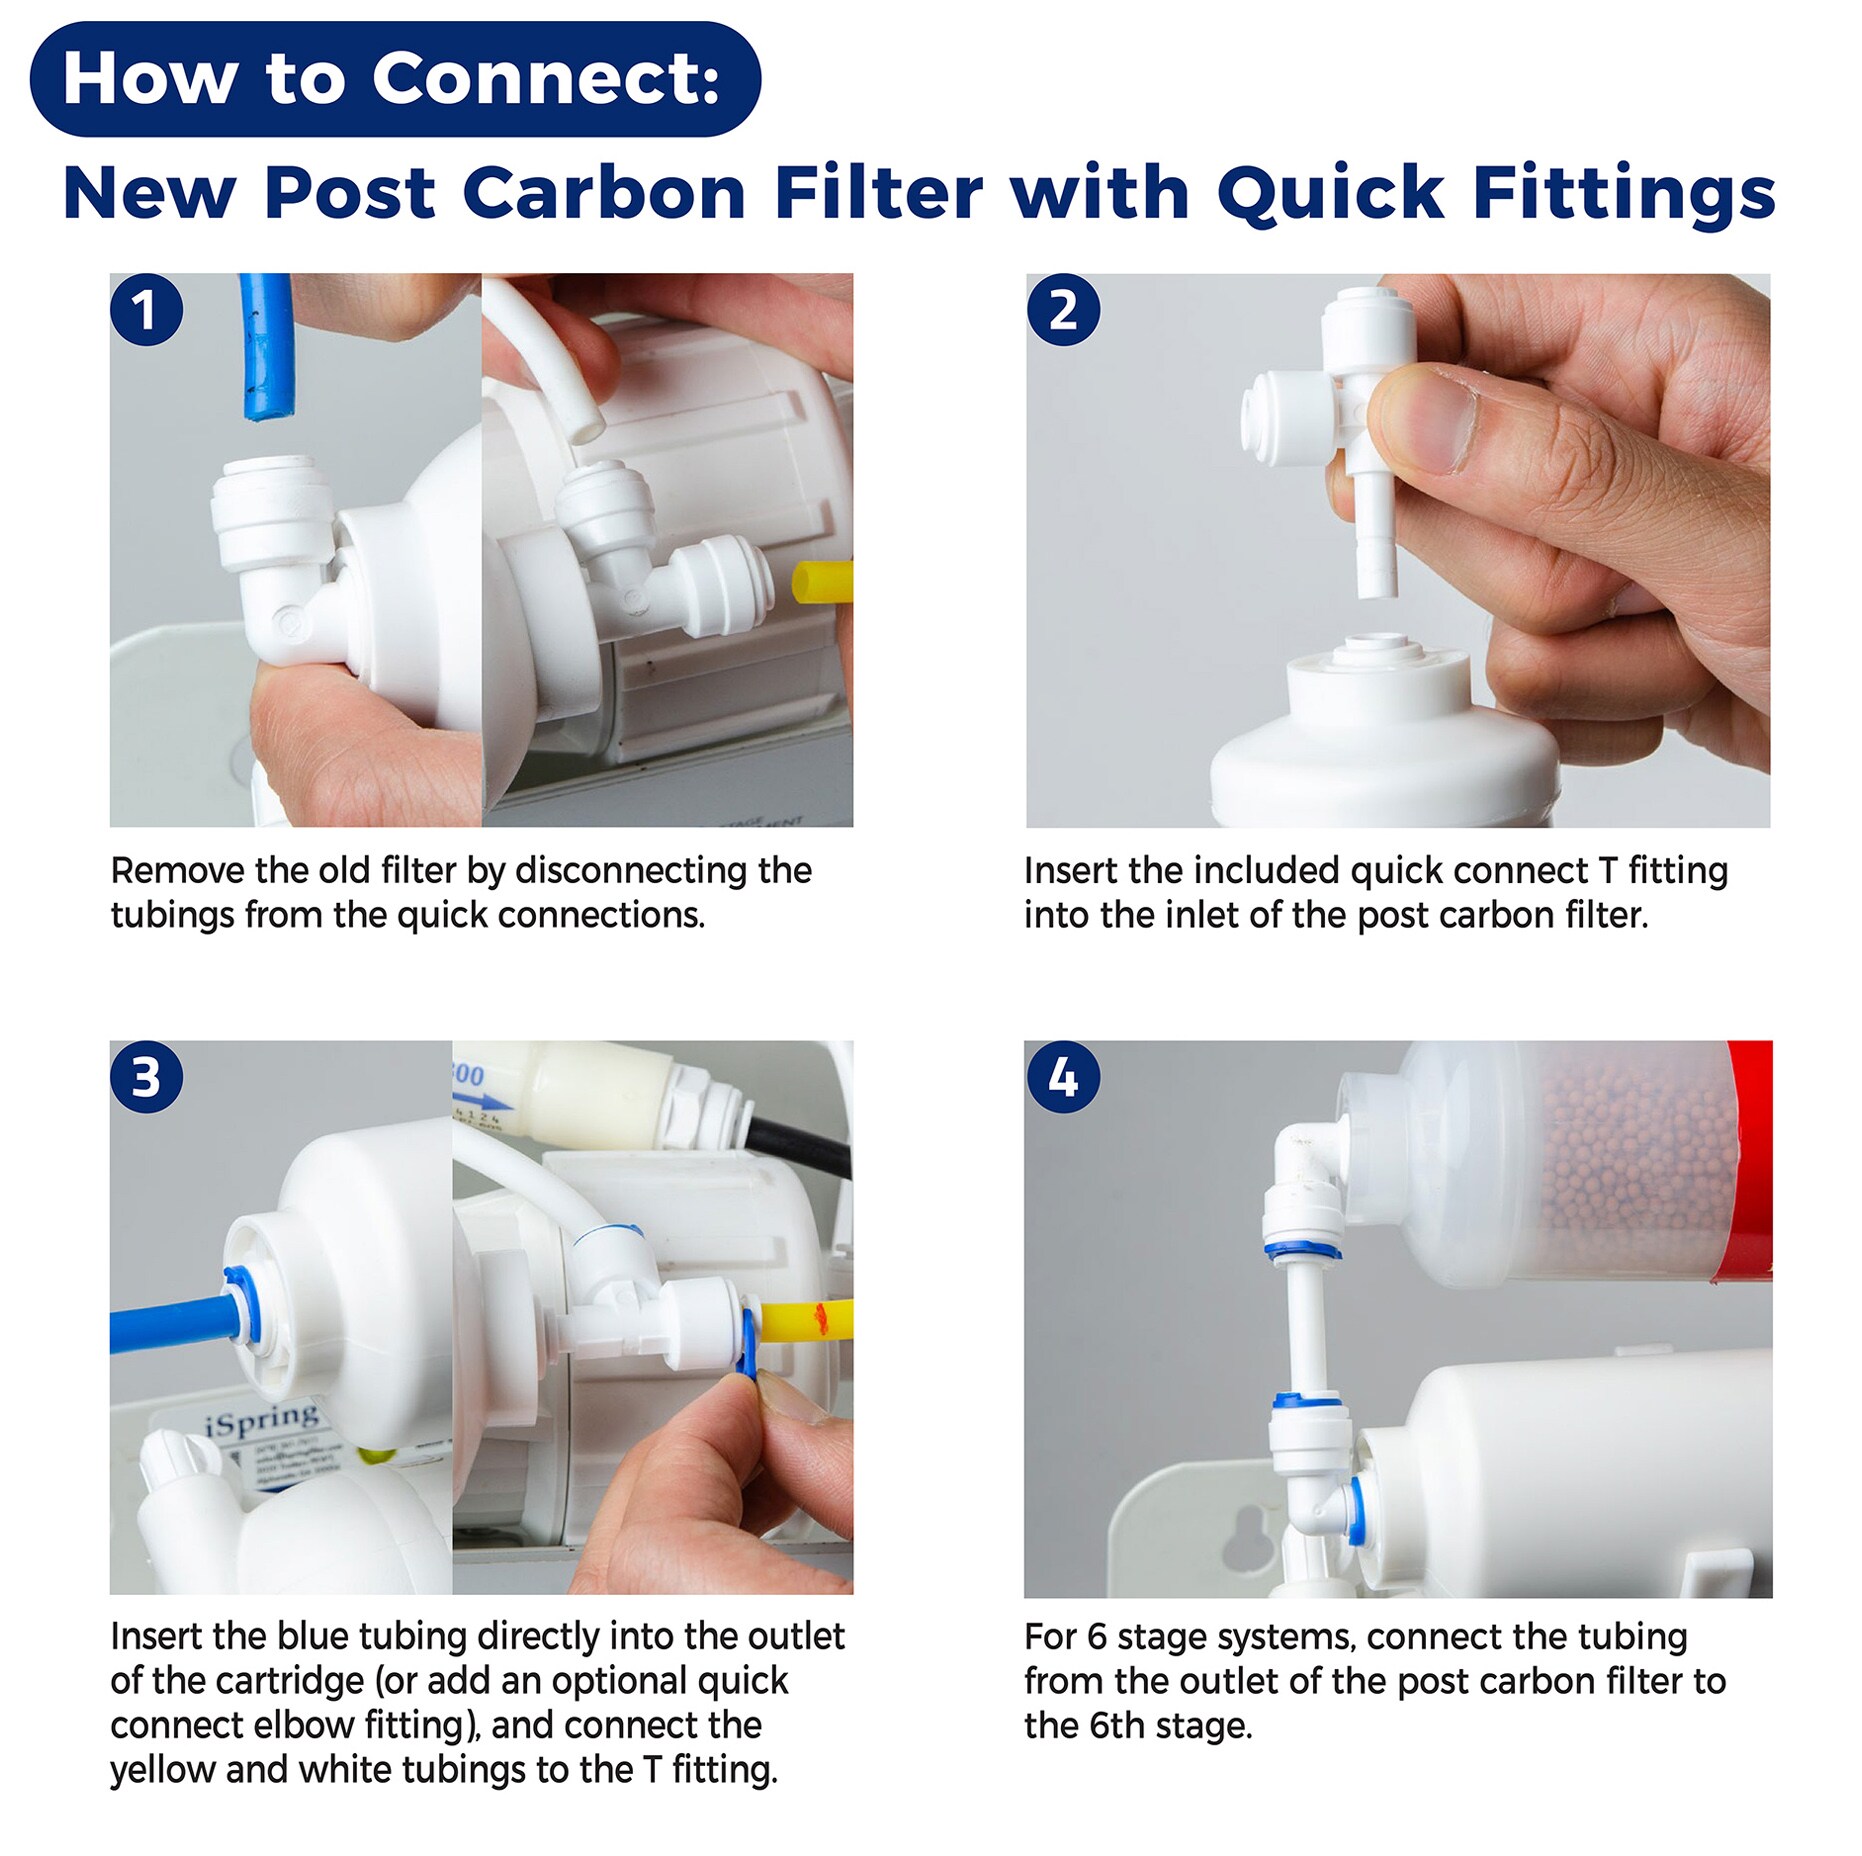 iSpring Icek Ultra Safe Fridge Water Line Connection and Ice Maker Installation Kit for Reverse Osmosis Systems & Water Filters